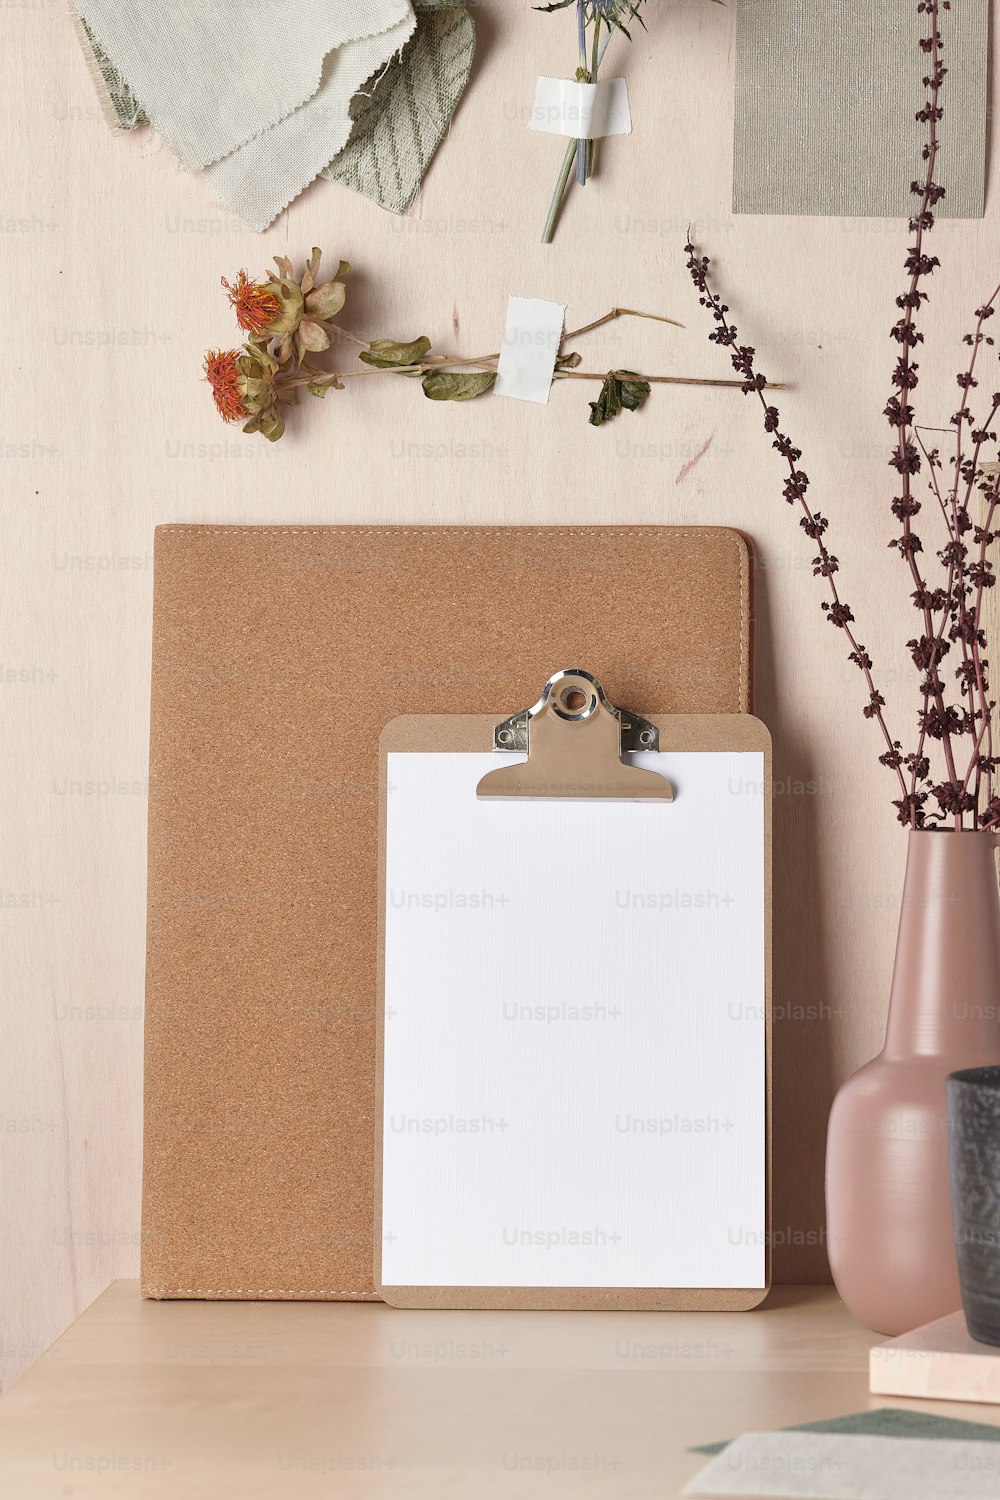 a clipboard with a clipboard attached to it next to a vase with flowers